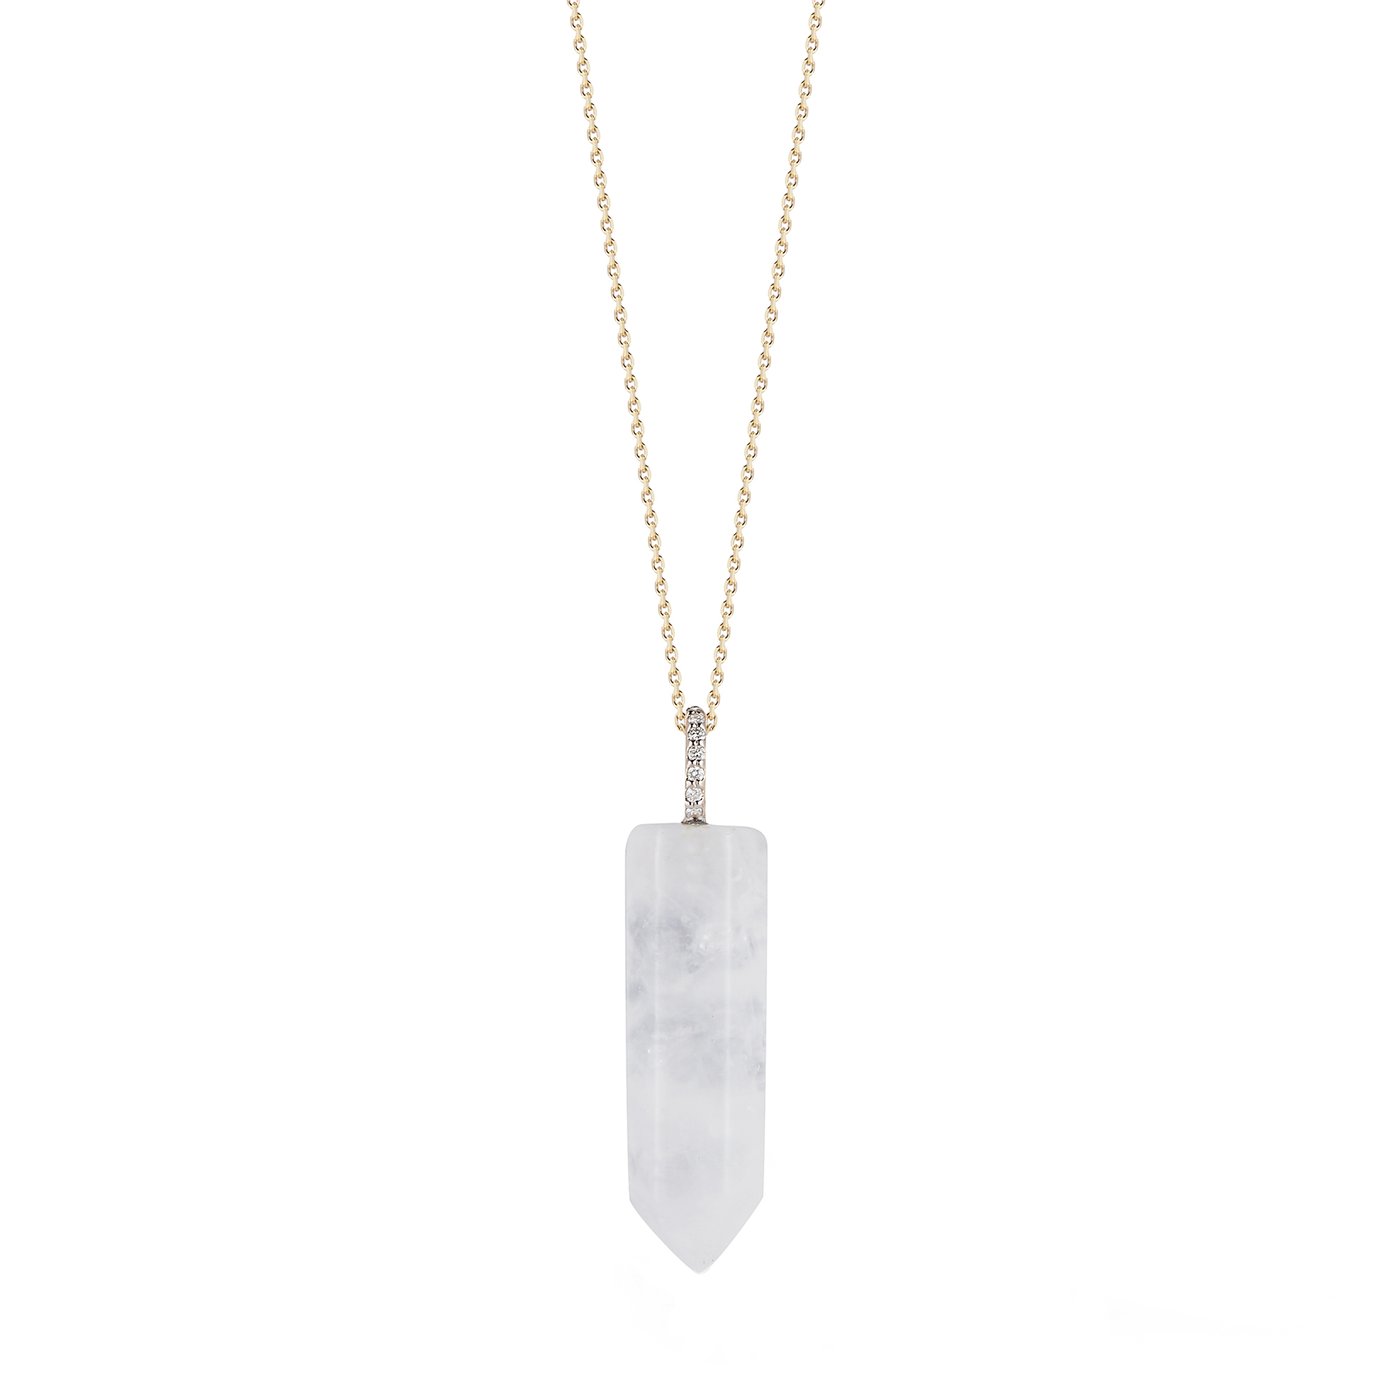 Mateo Healing Crystal Necklace